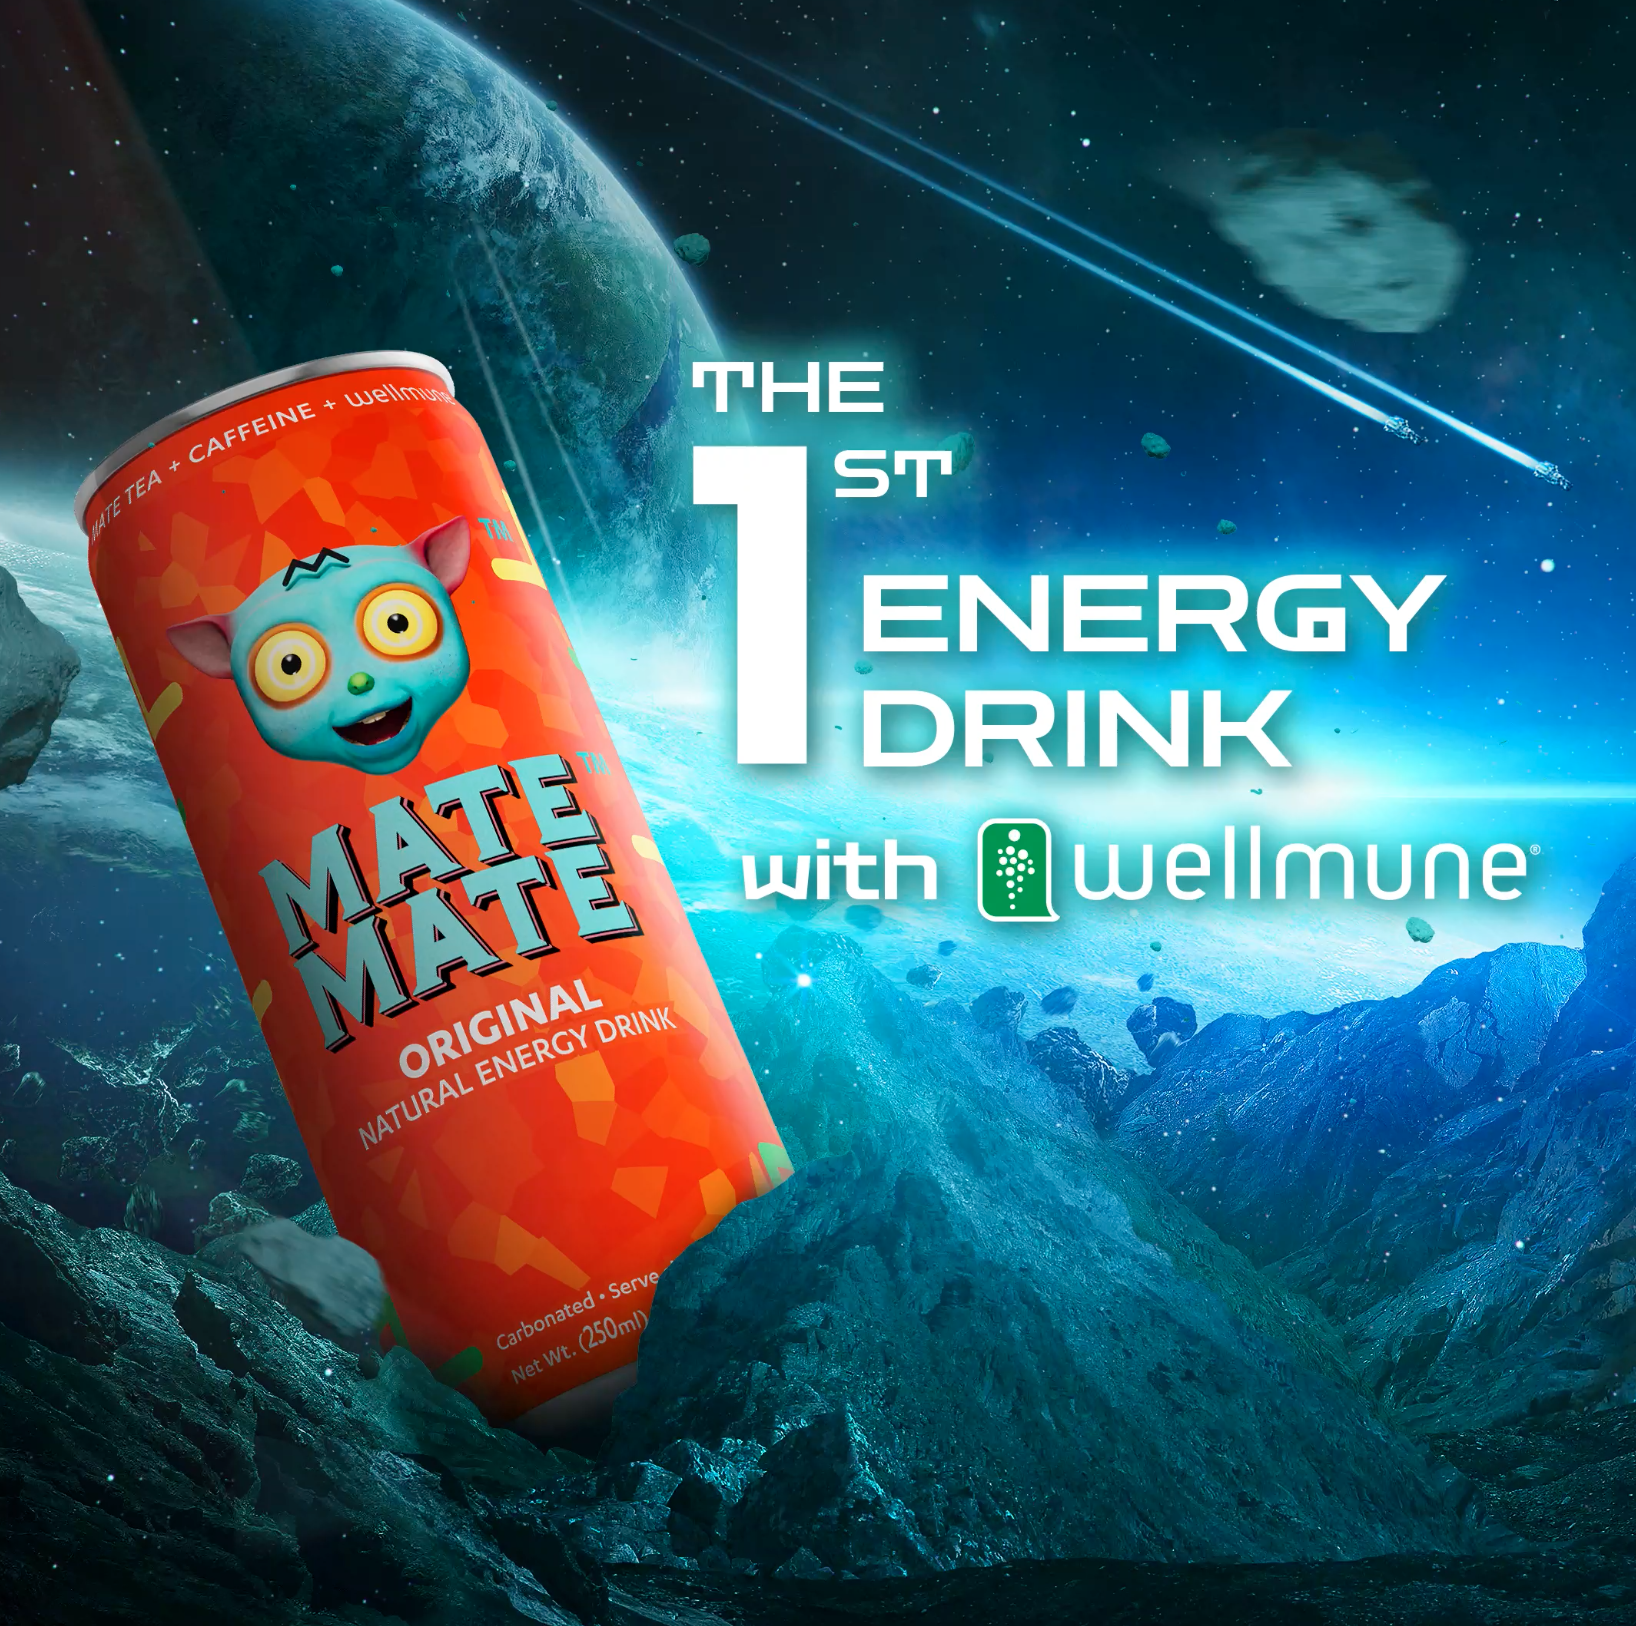 energy drink with wellmune